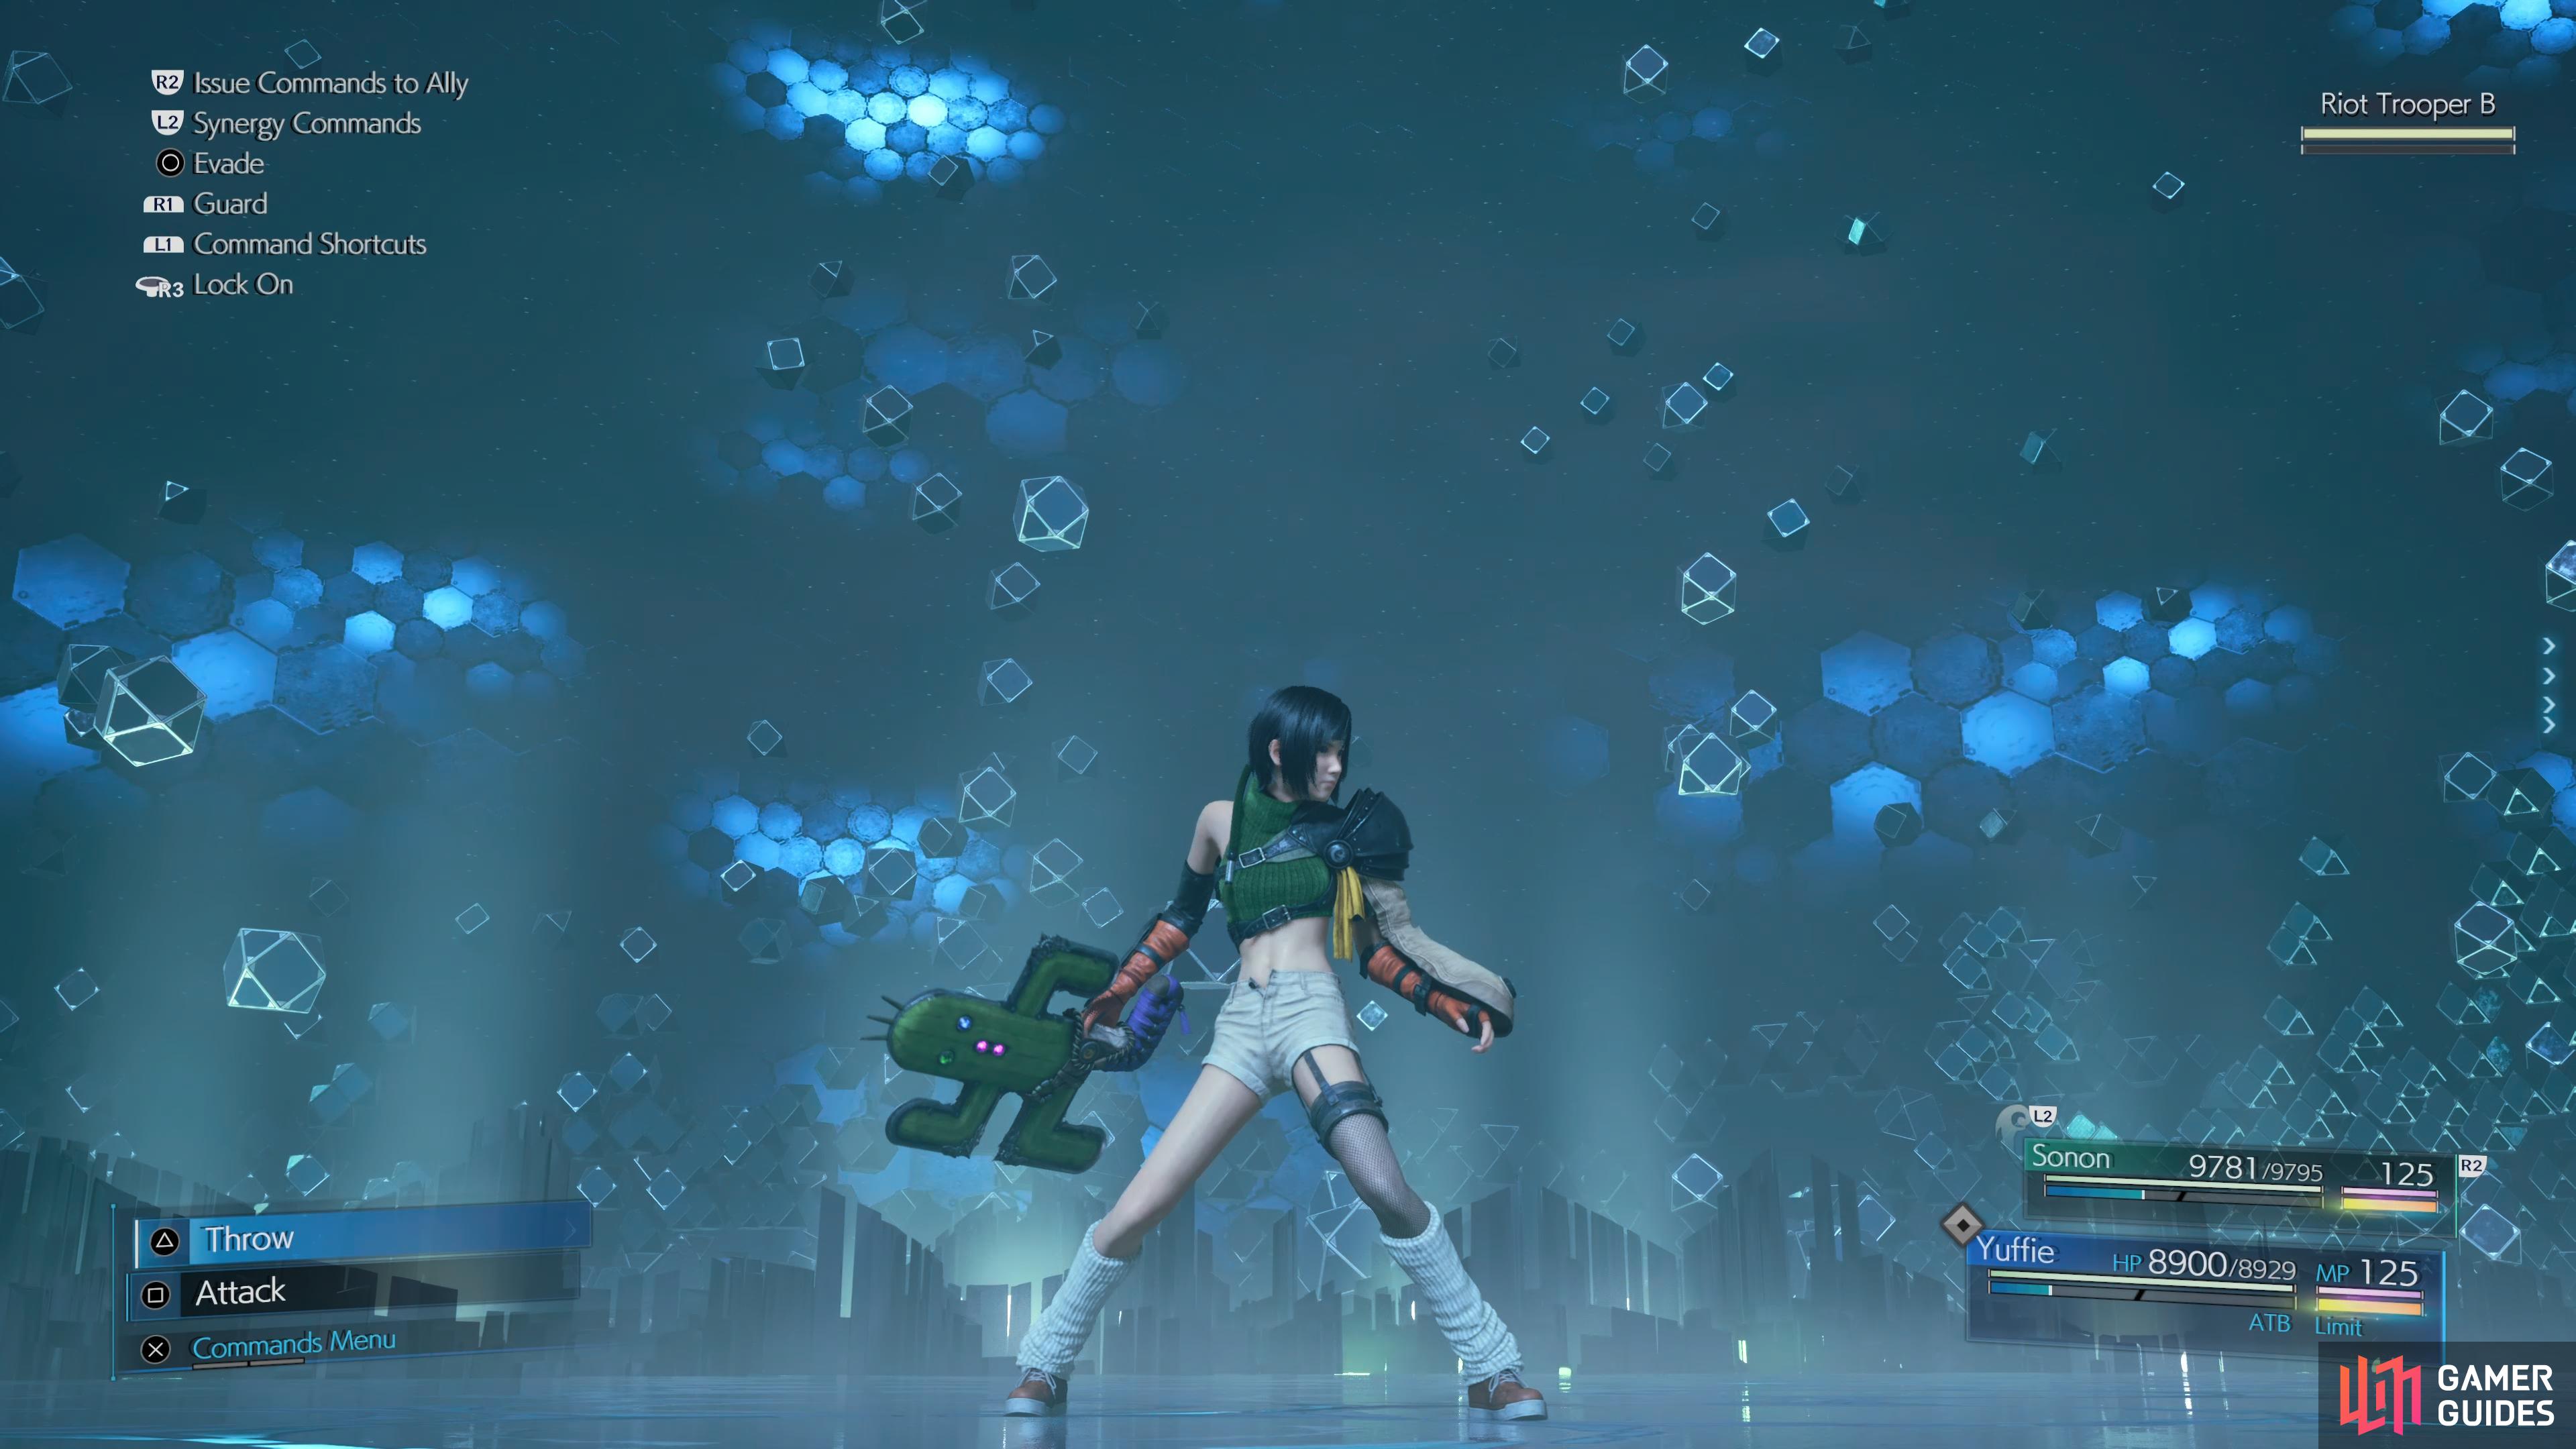 Yuffie's Cacstar weapon is a DLC weapon, you cannot obtain it any other way.